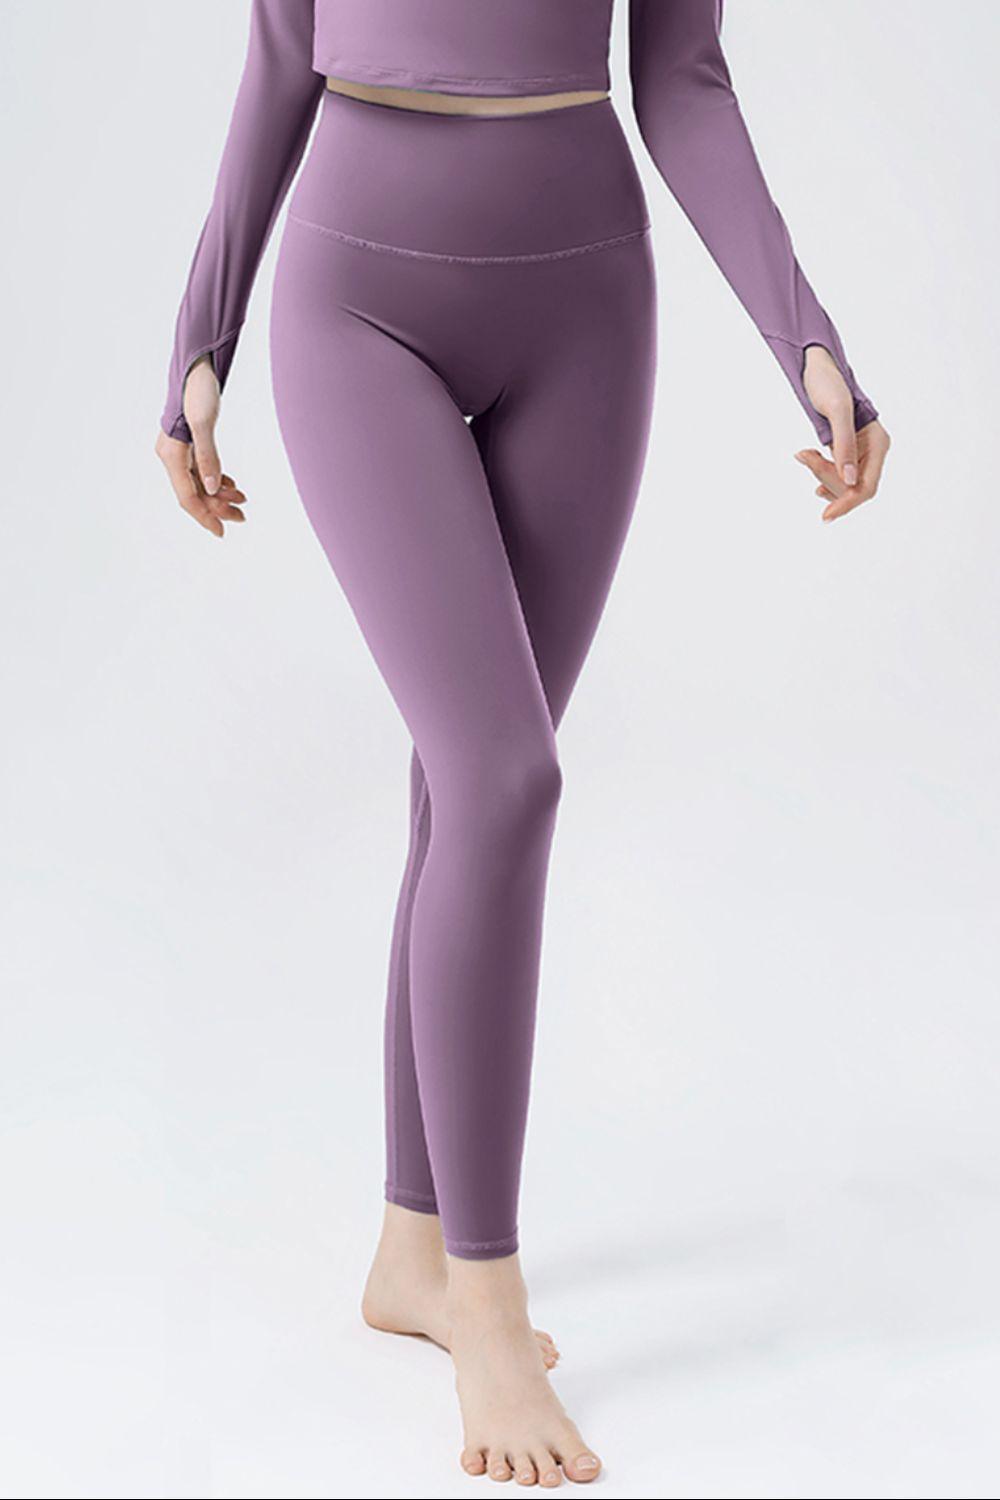 a woman in a purple top and leggings